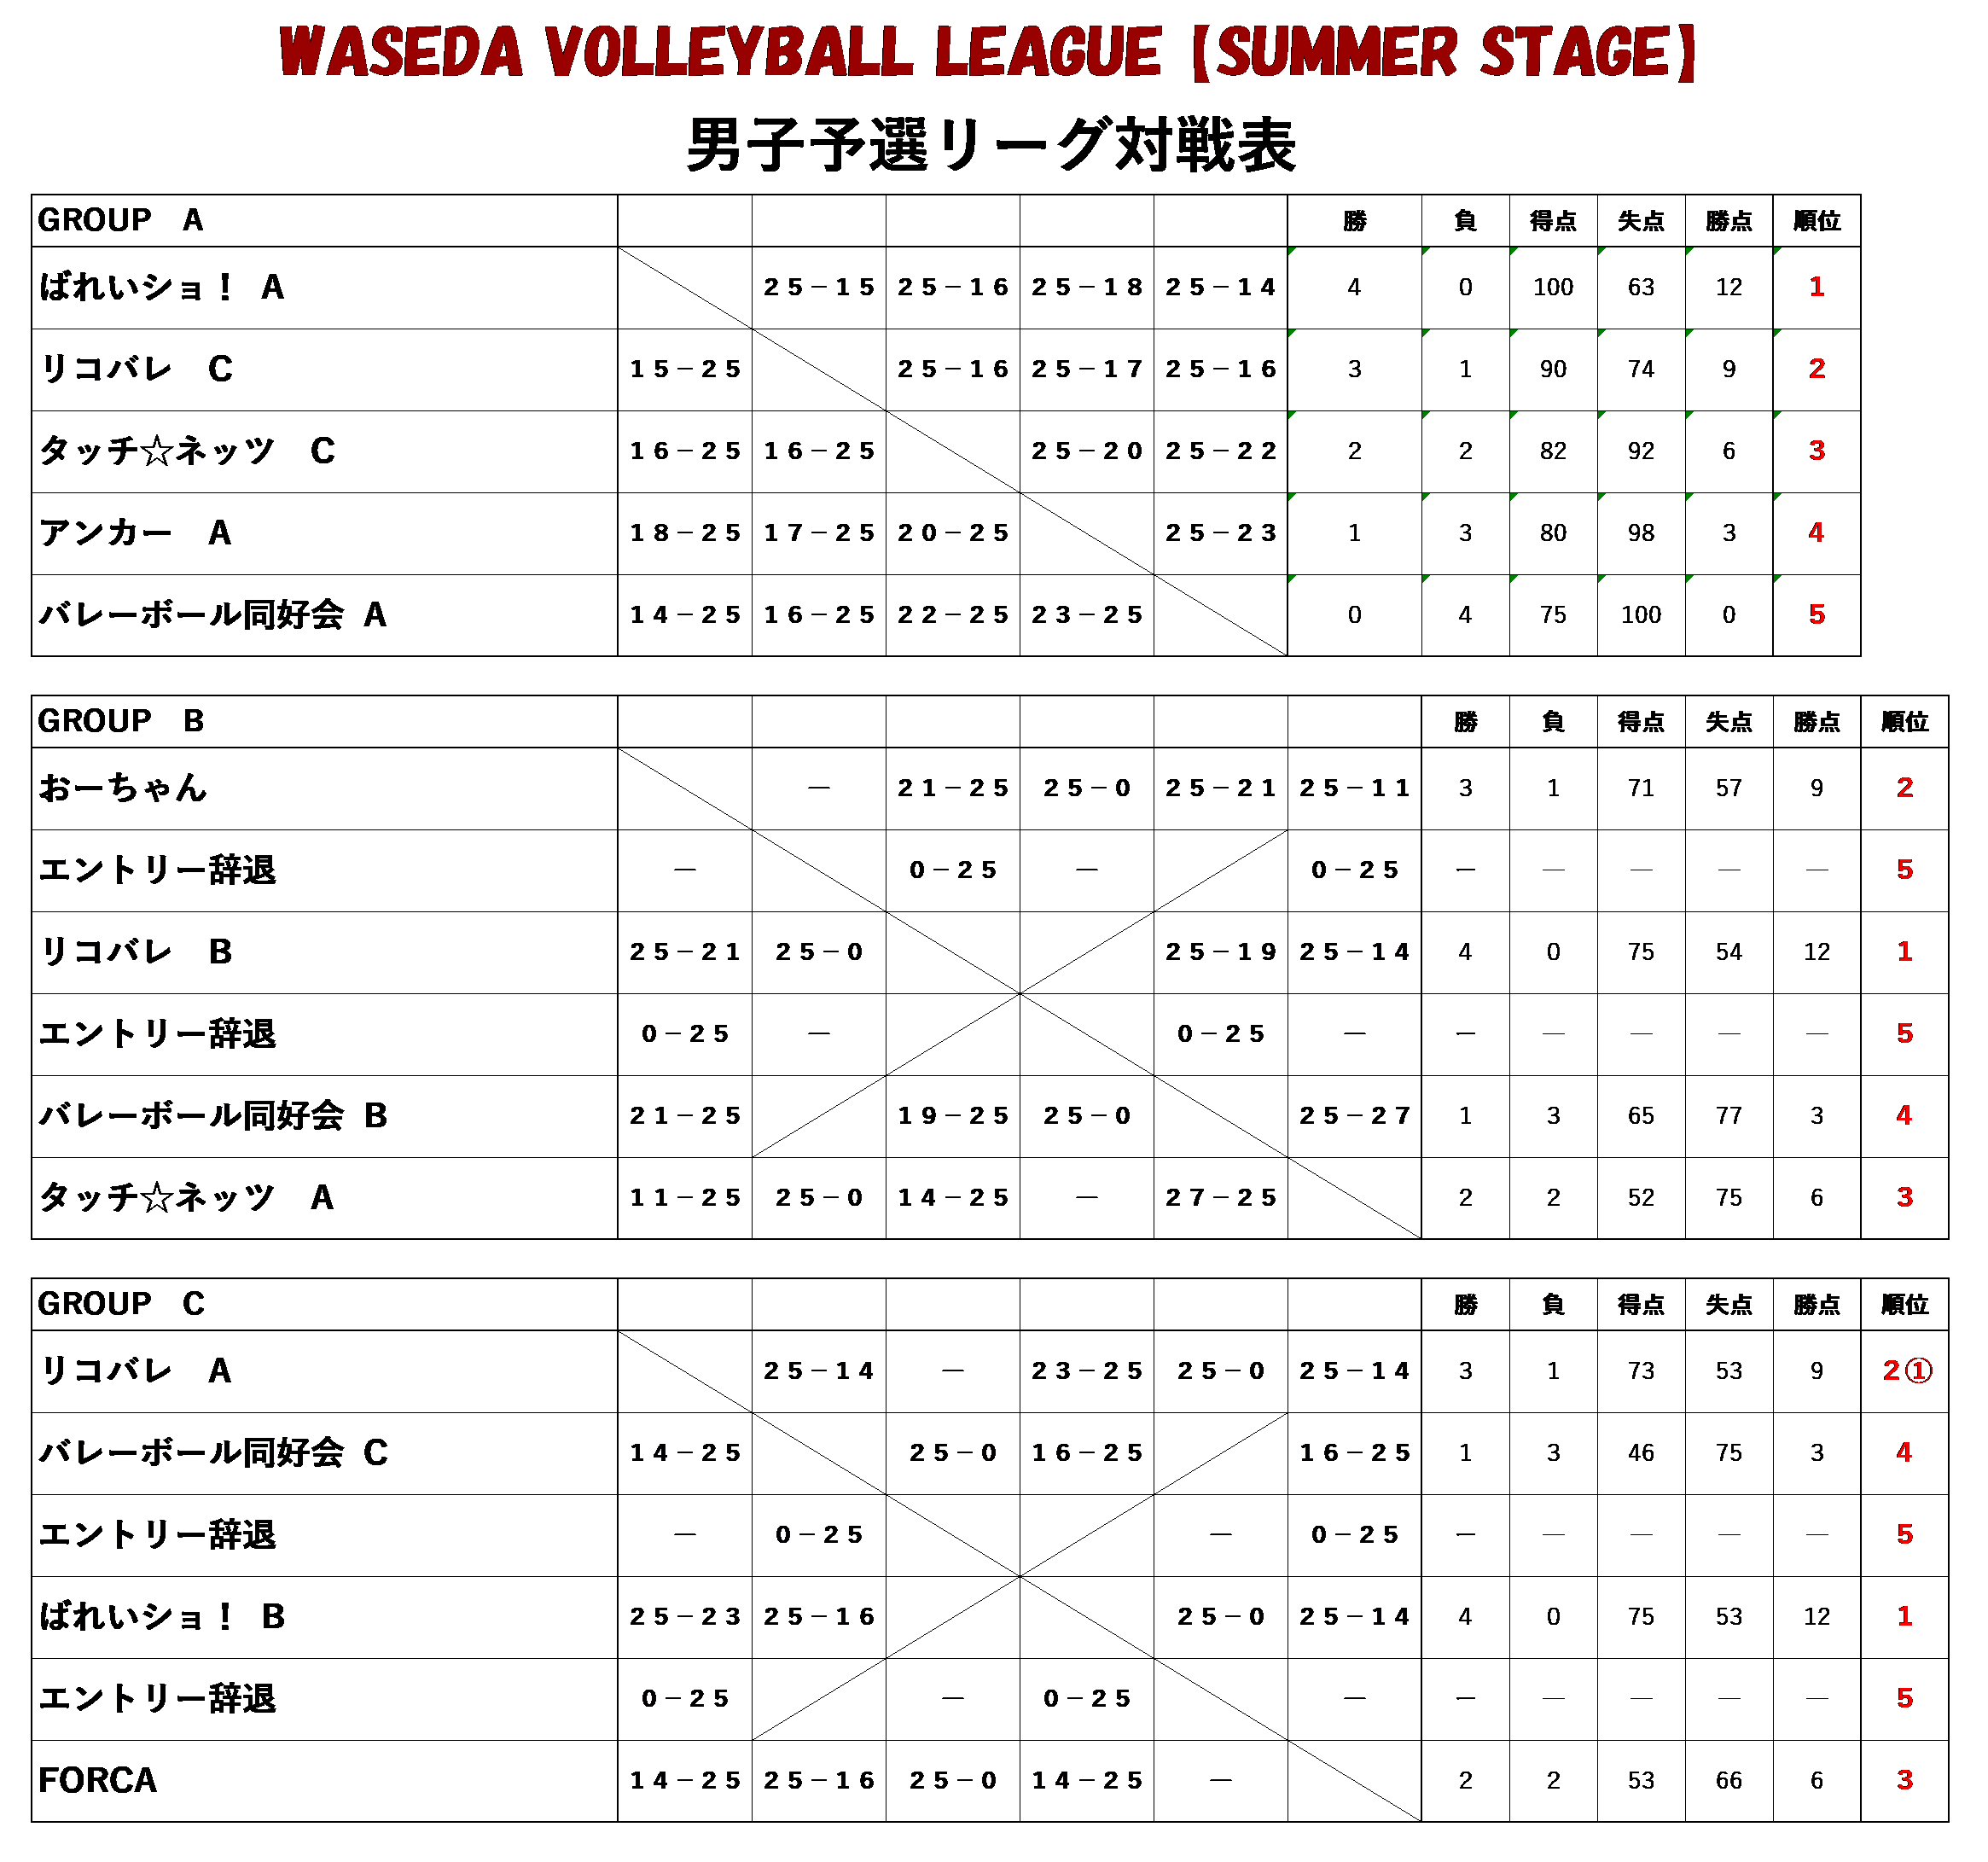 ③WASEDA VOLLEYBALL LEAGUE 2022【SUMMER STAGE】男子予選